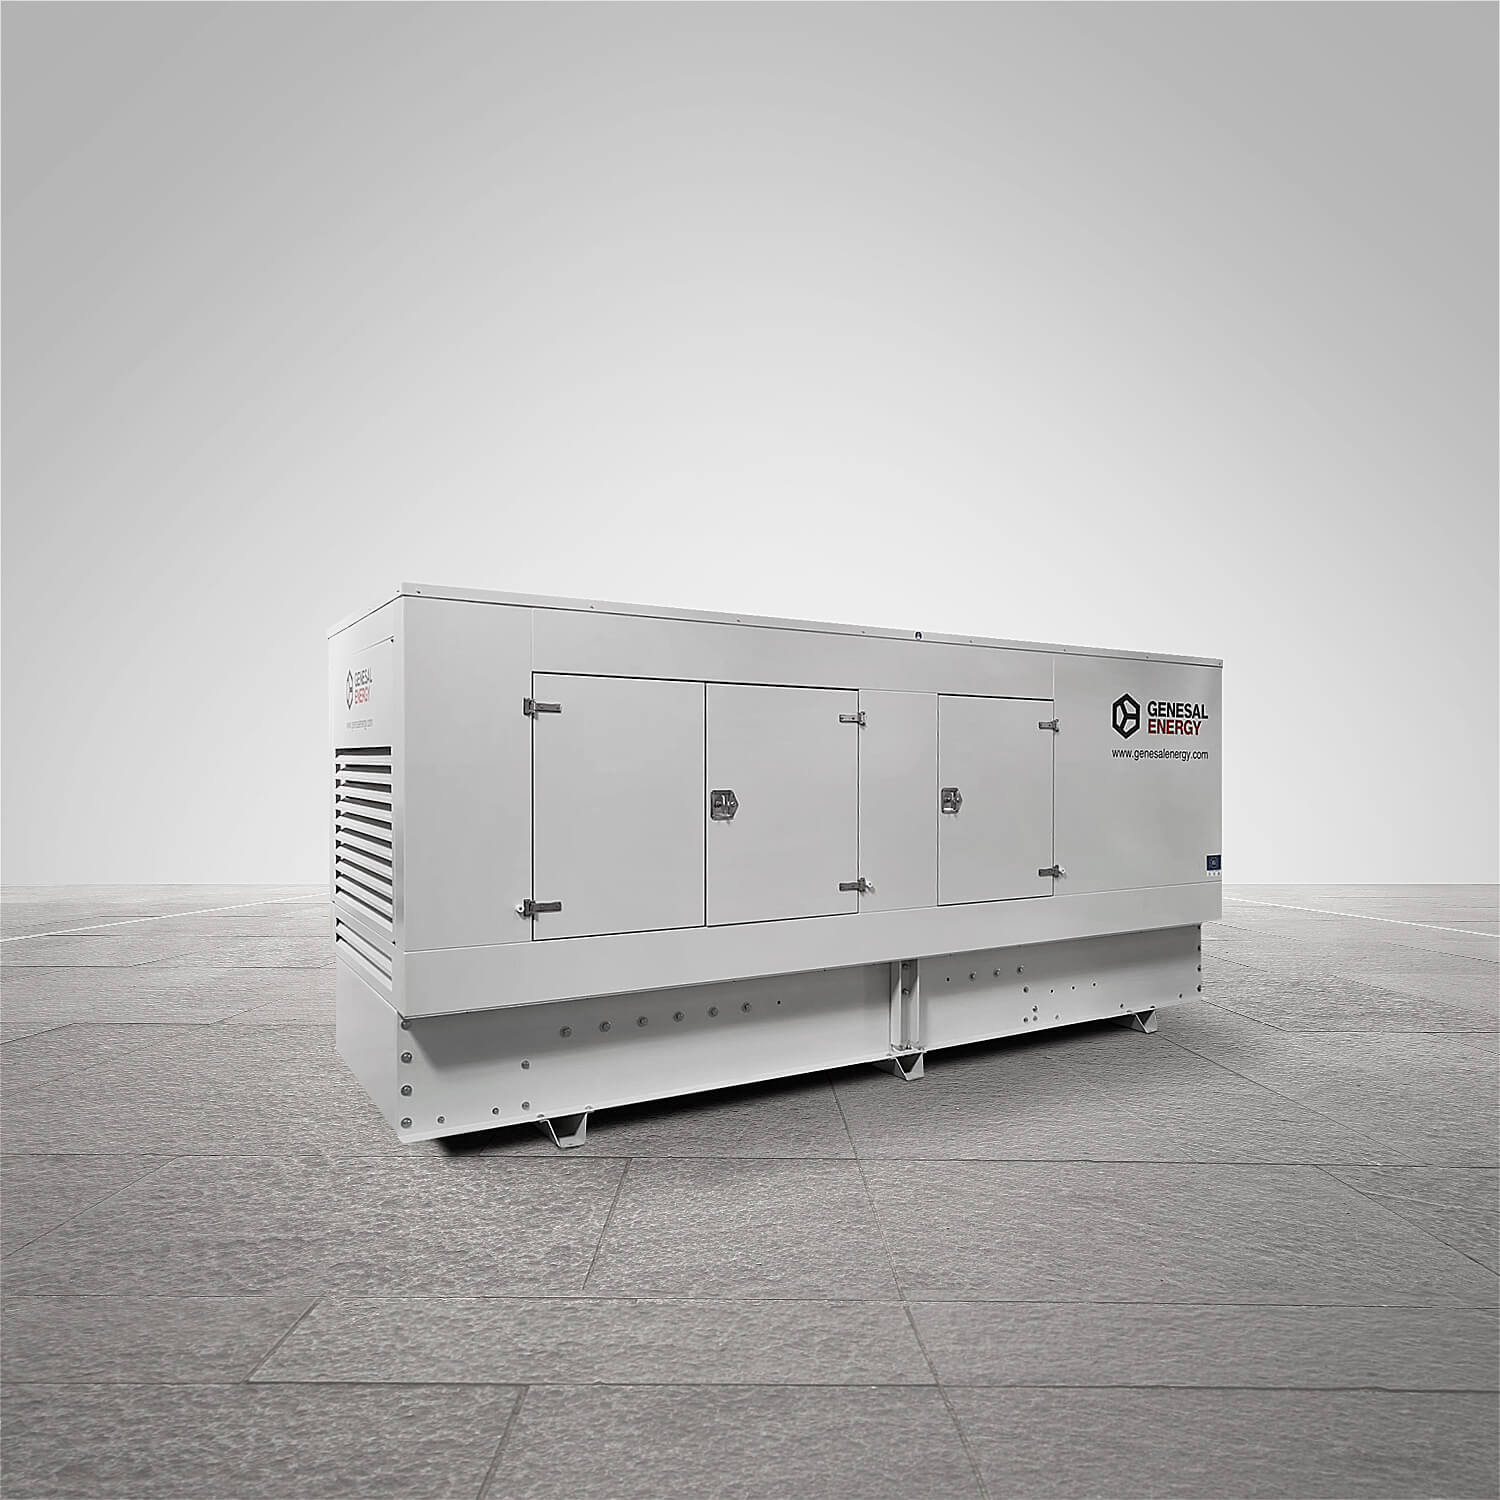 We supplied a generator set to a senior centre in Madrid.